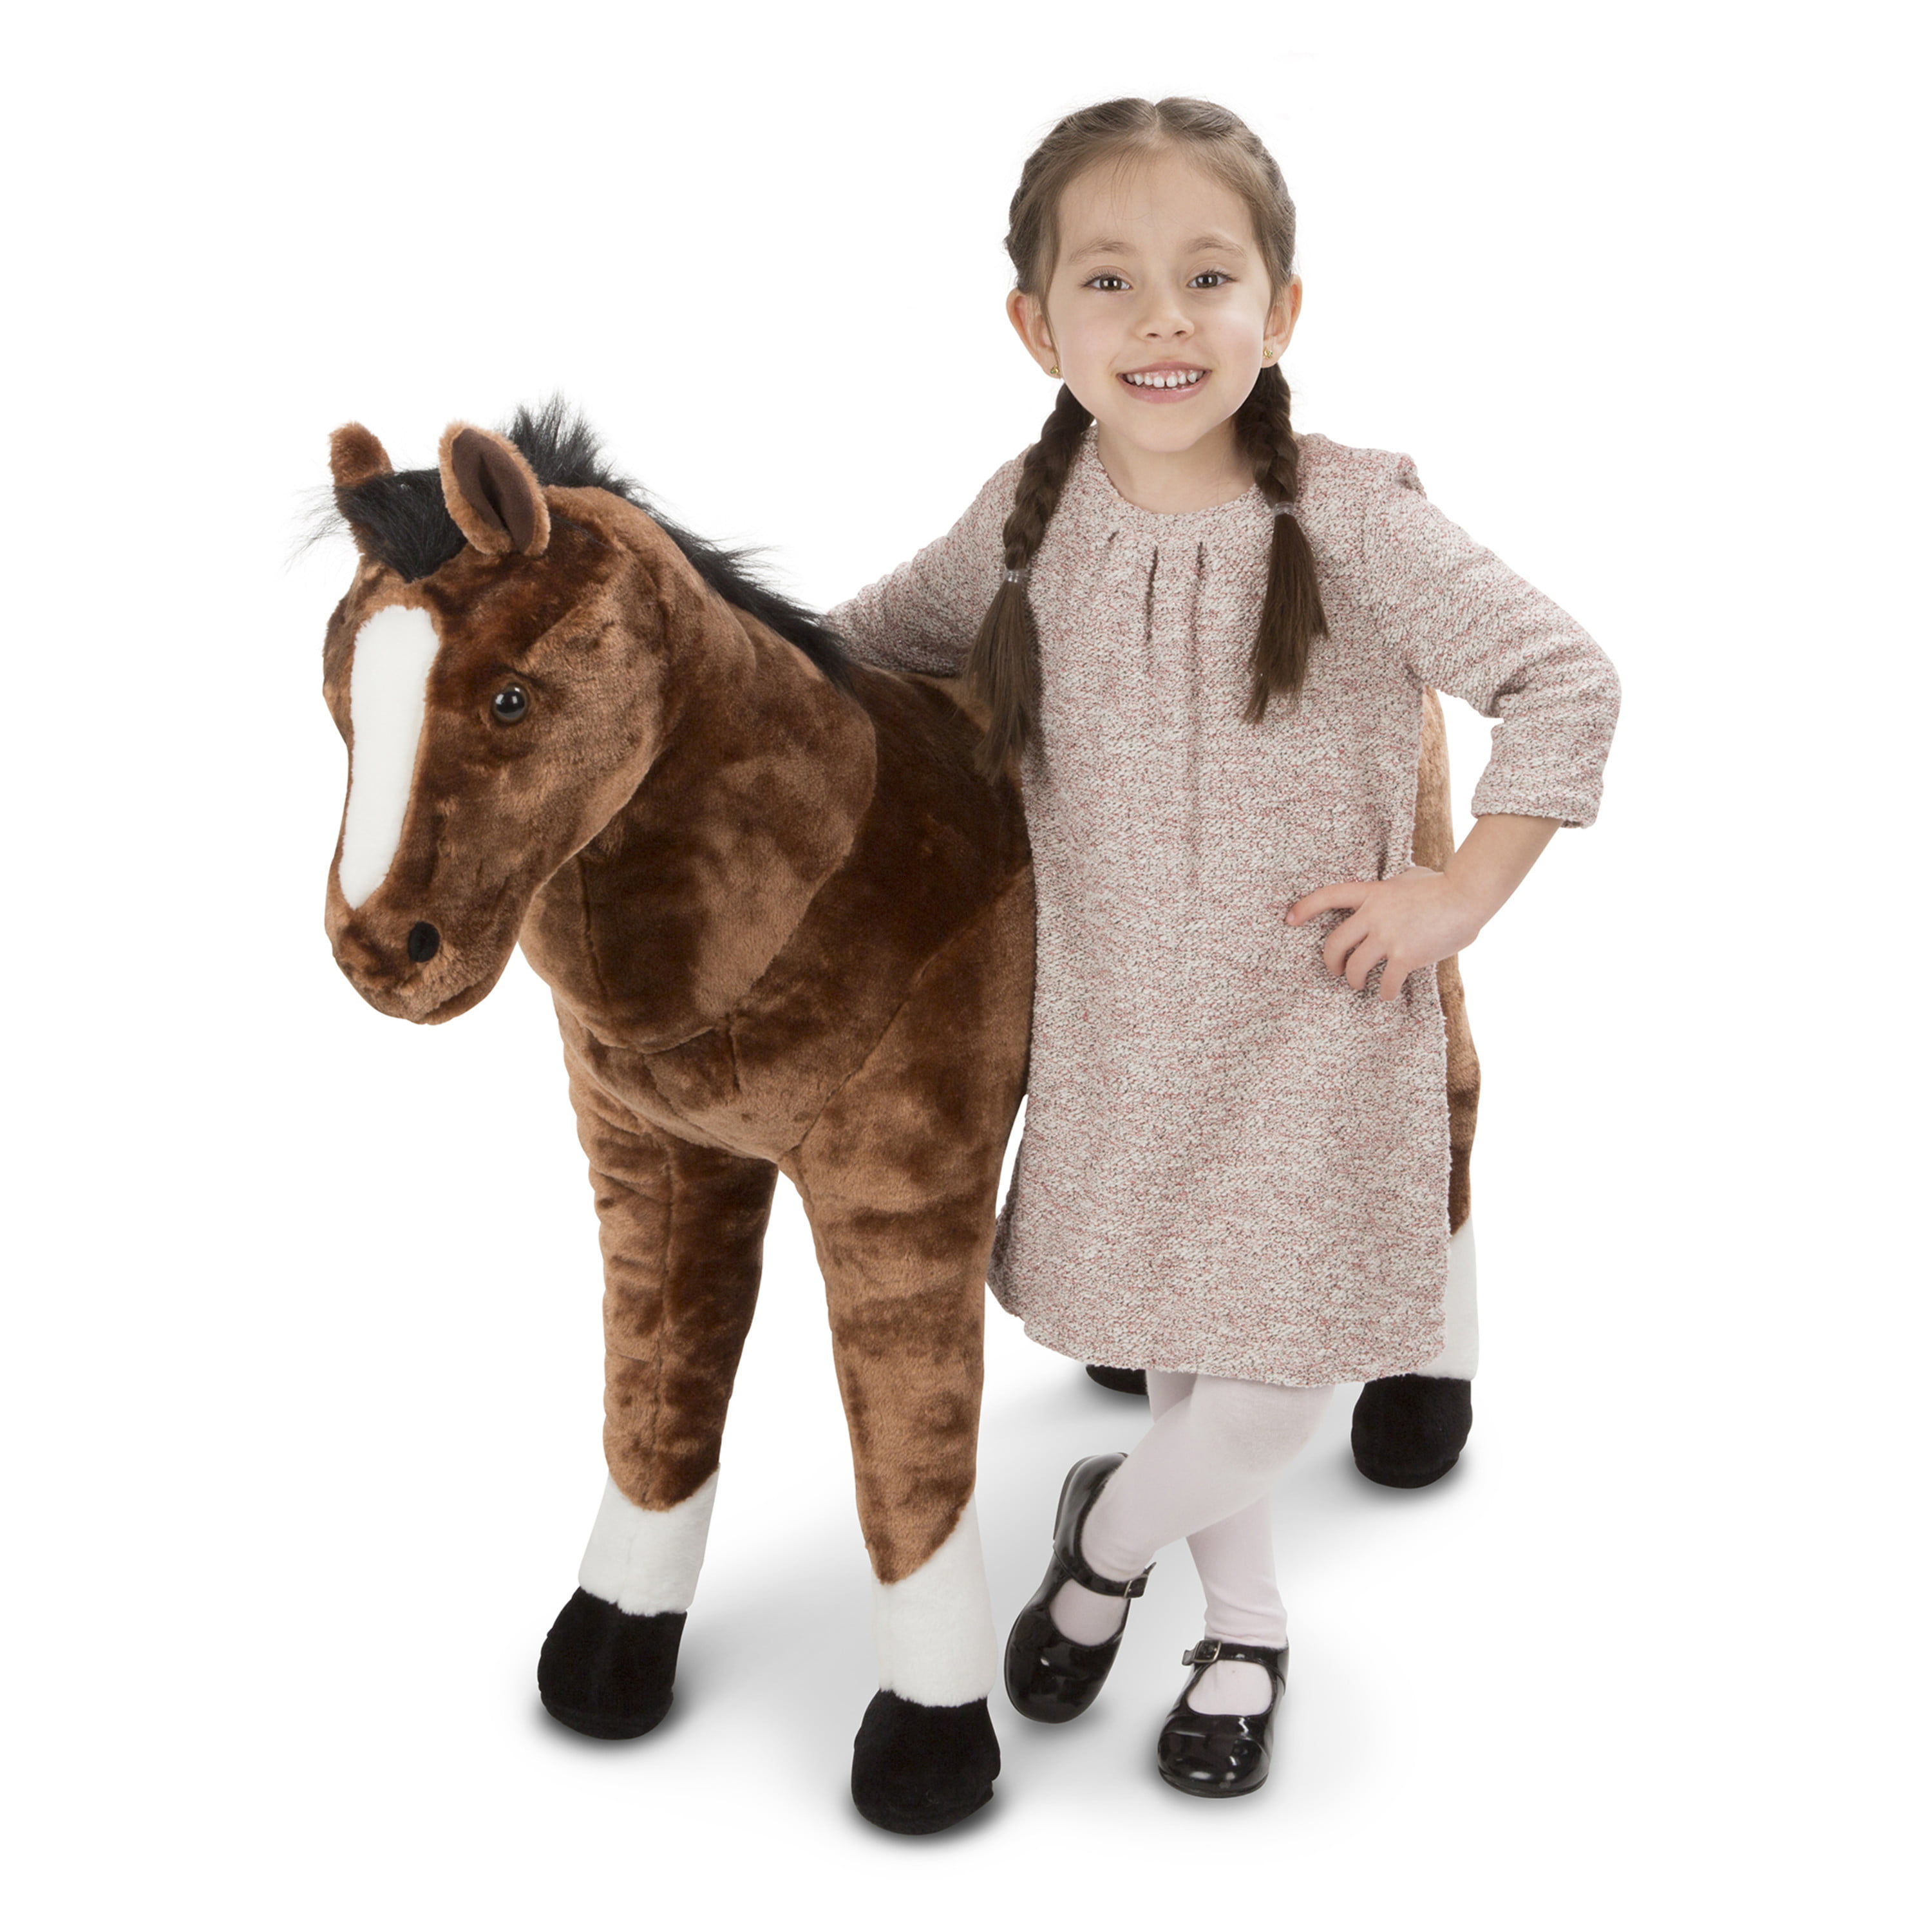 MELISSA AND DOUG PLUSH SWEATER SWEETIE HORSE NEW FREE SHIPPING 